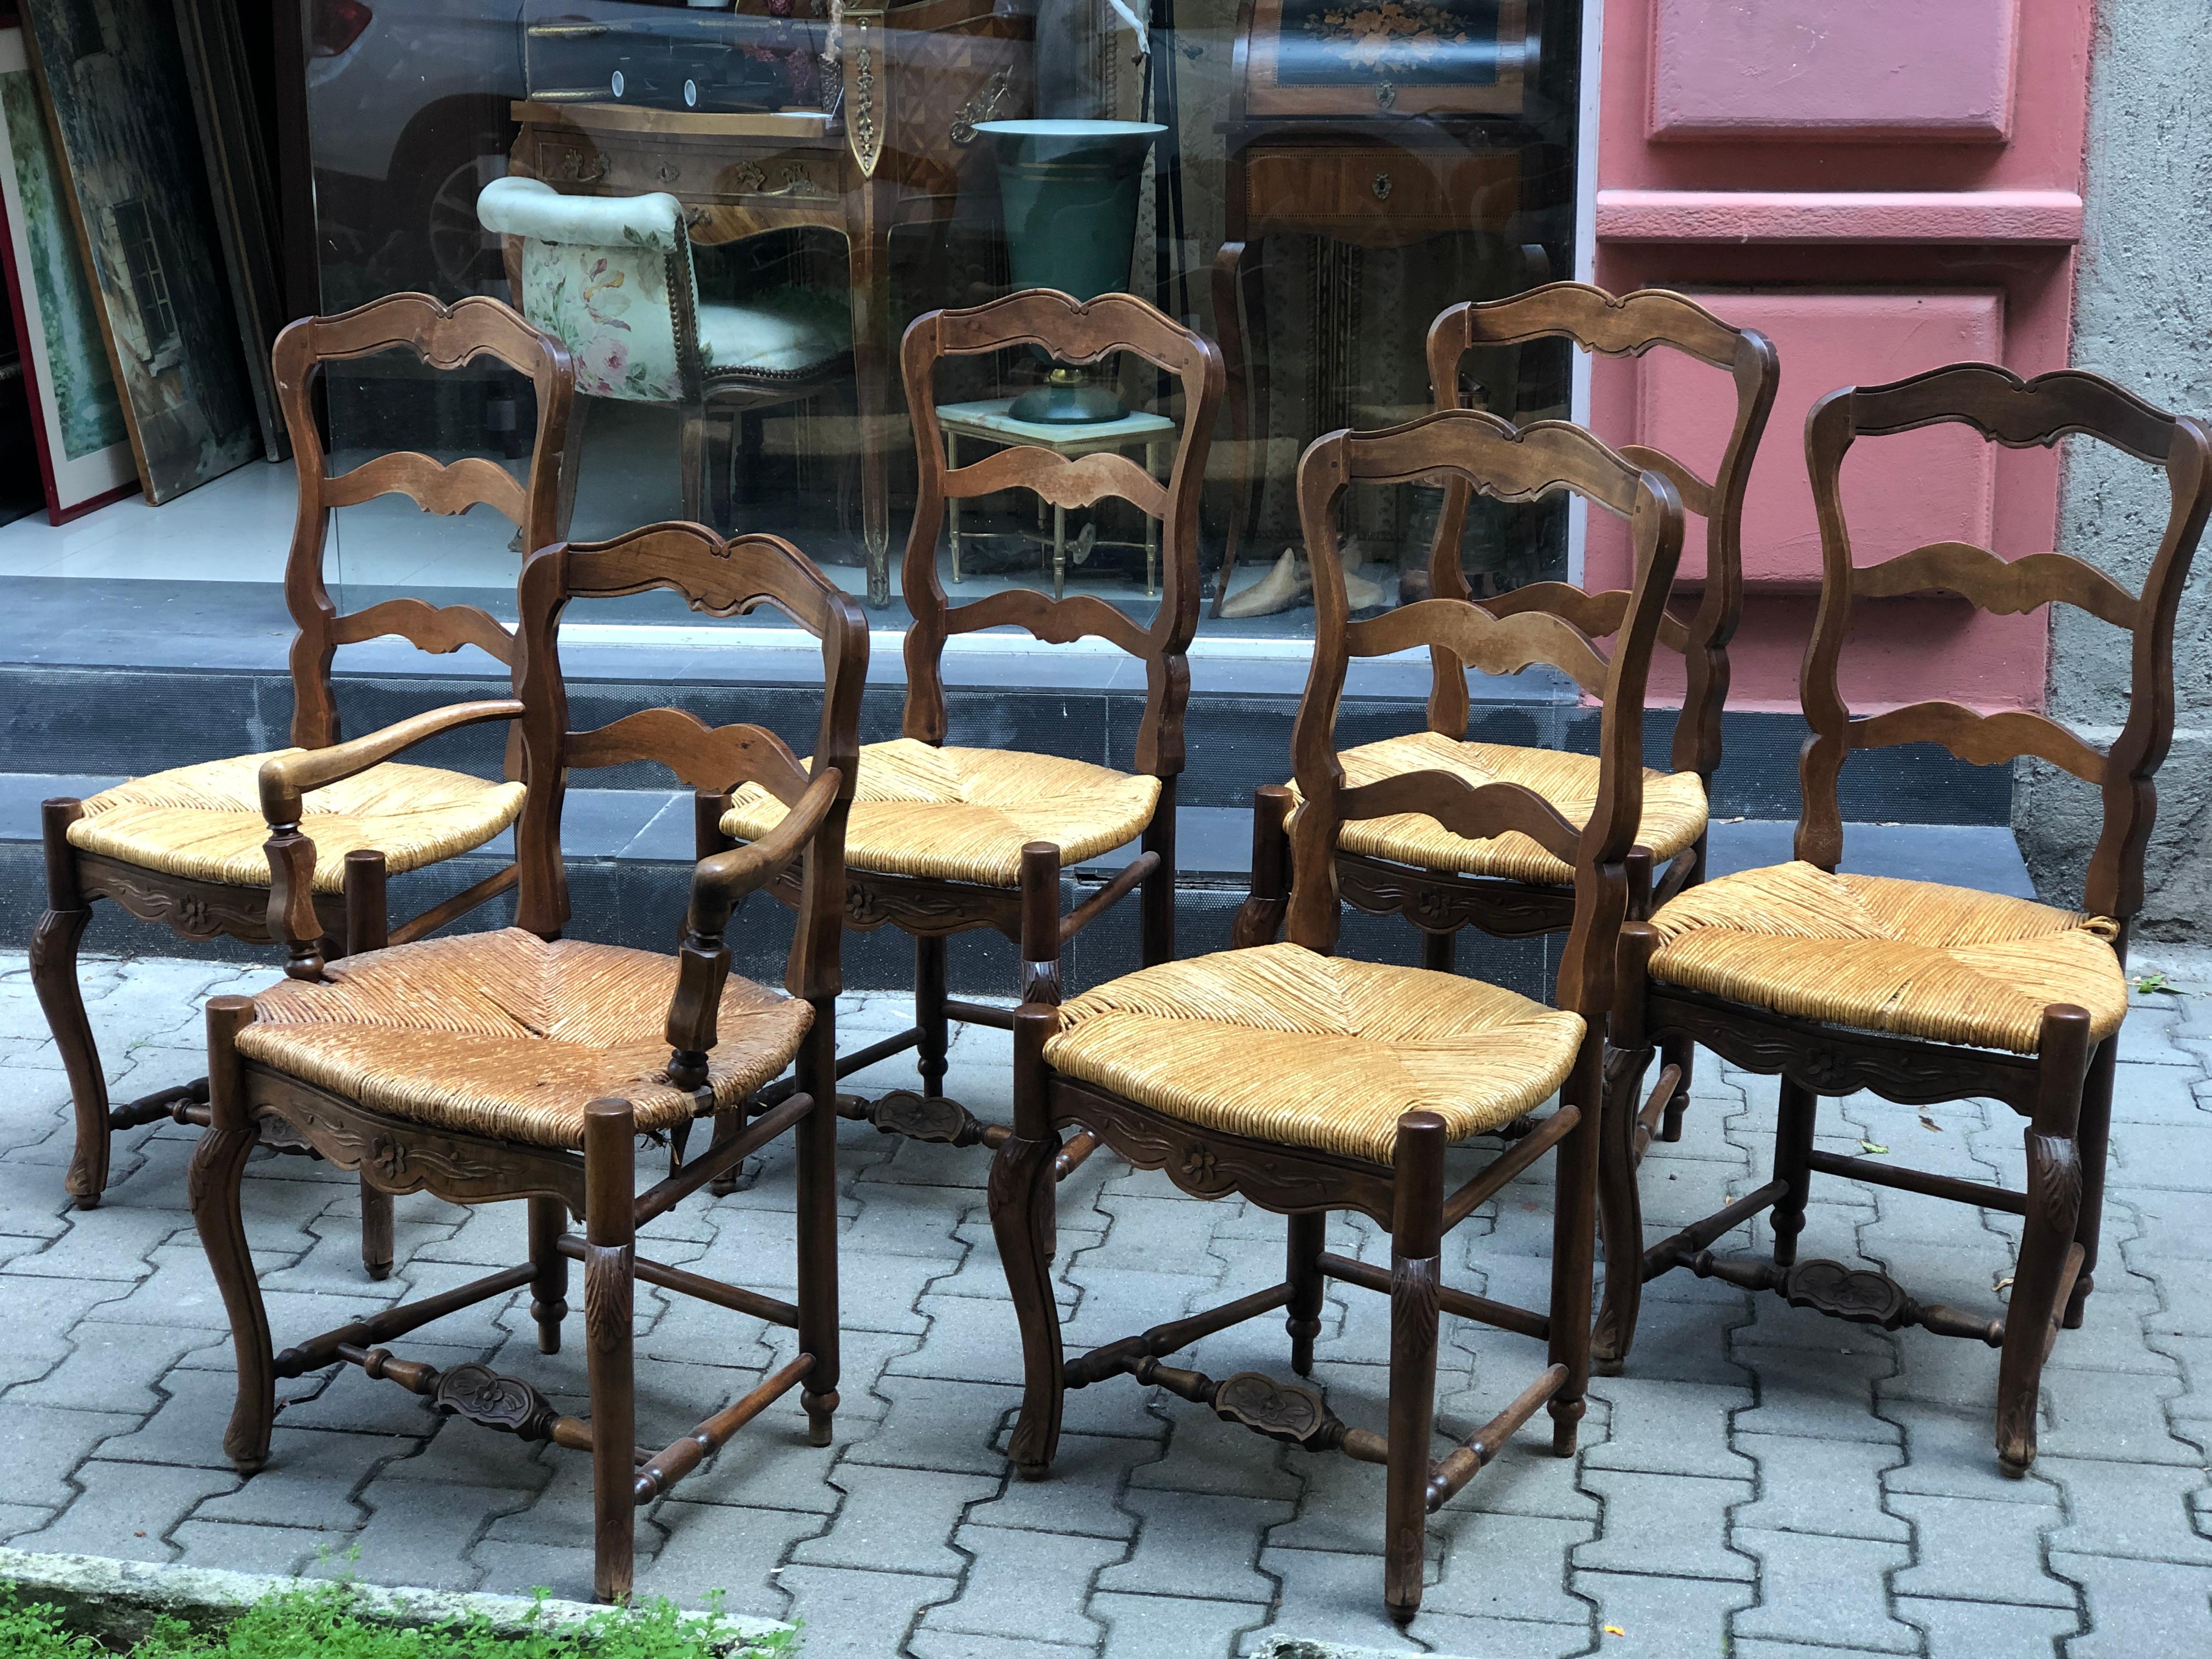 Six dining chairs from 19th century. Massive walnut hand carved frame with floral accents and rush seats. Five chairs and one armchair with lower back.
All in good condition. Could be sold separately.